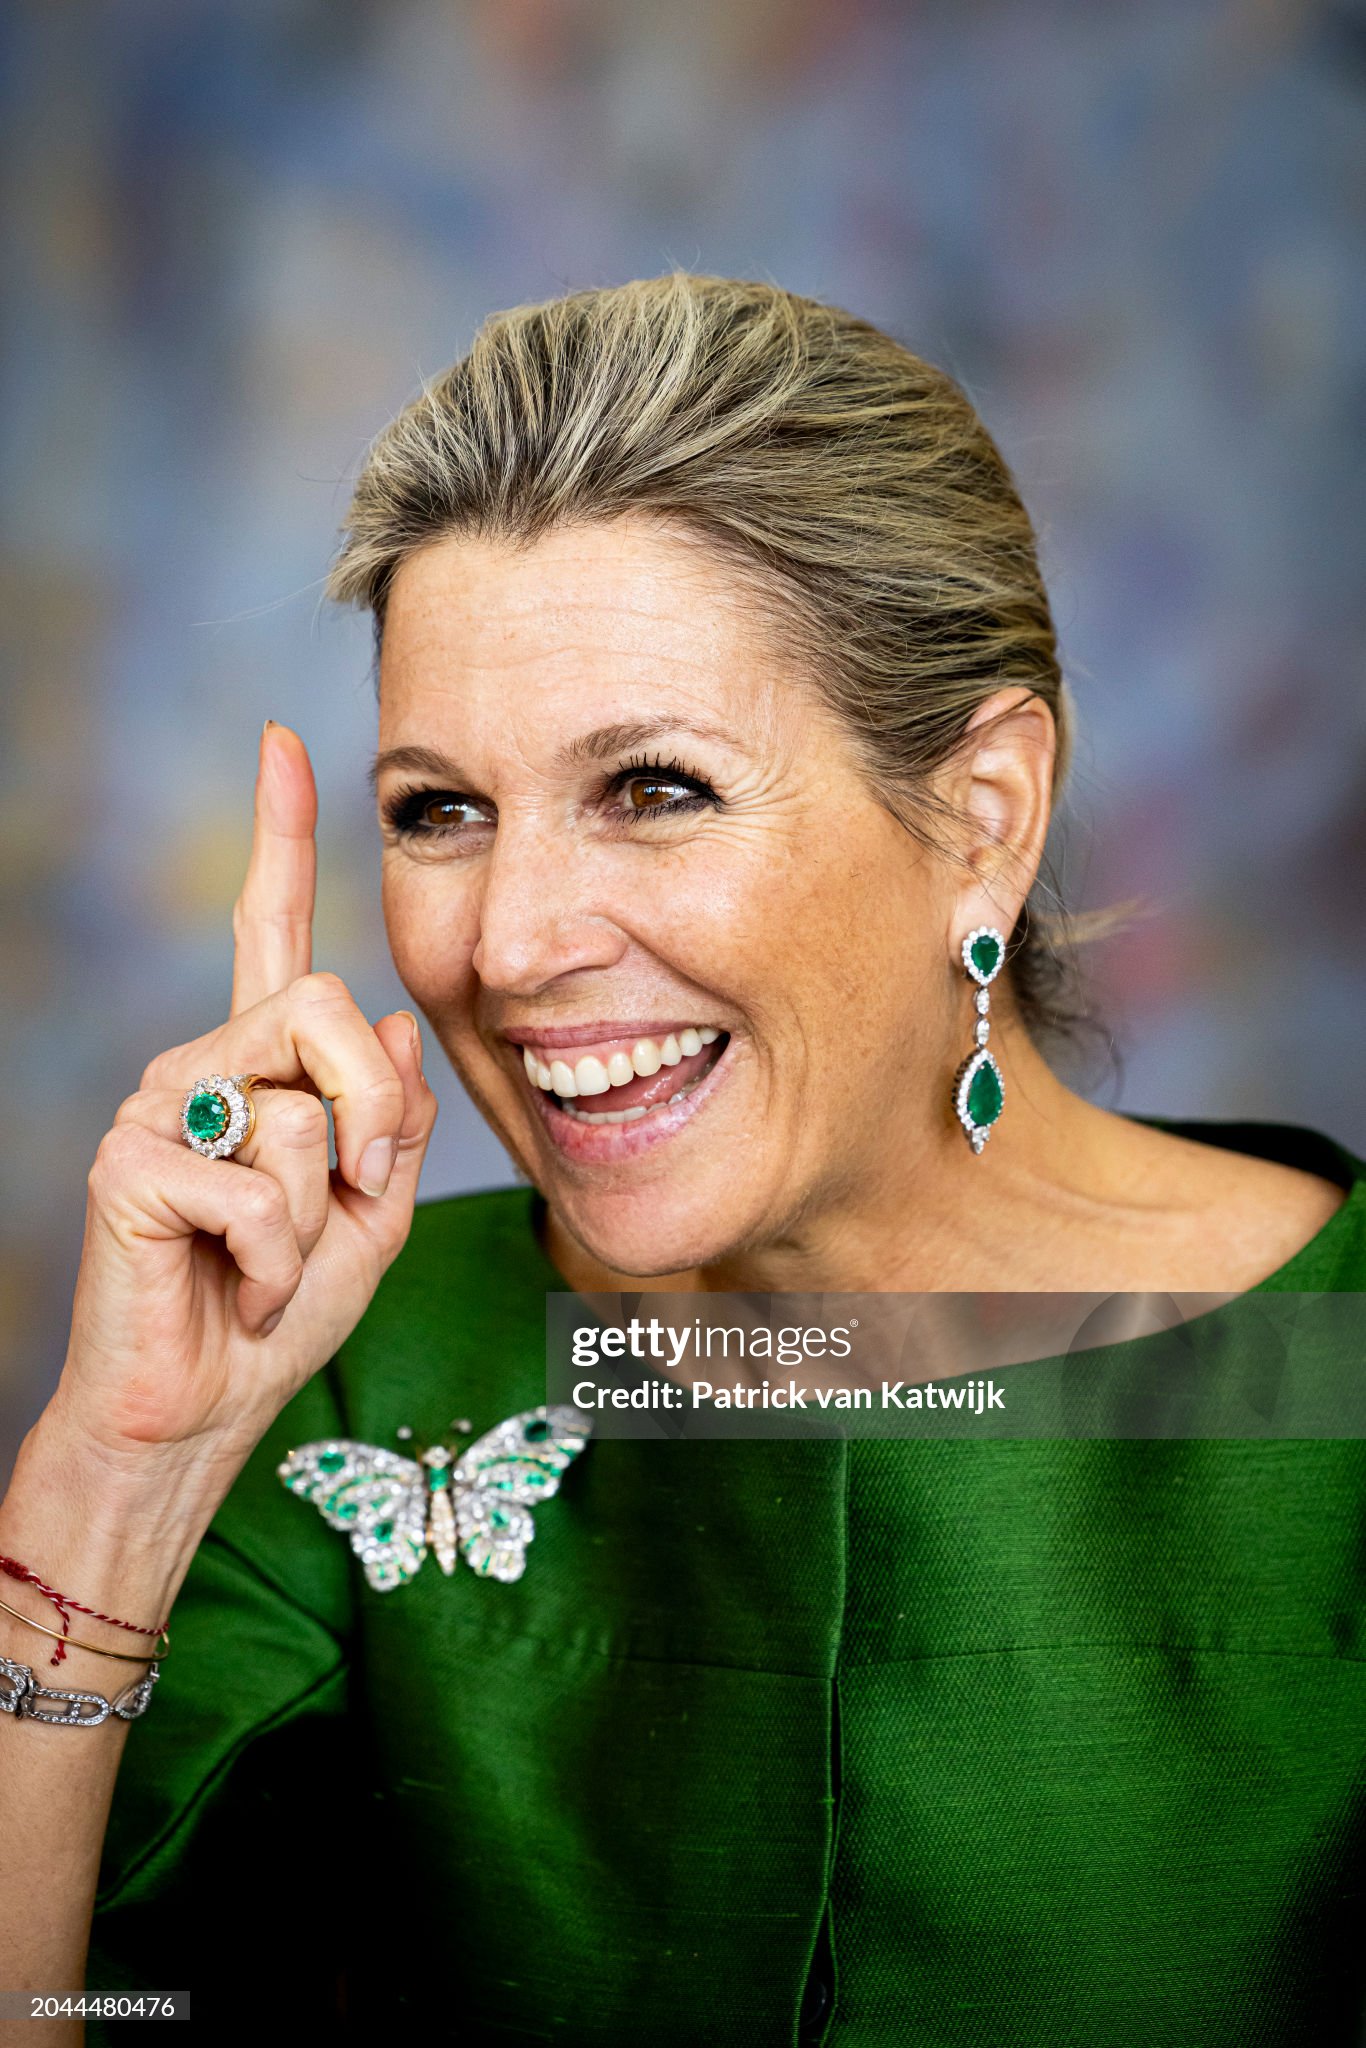 queen-maxima-of-the-netherlands-visits-colombia-day-two.jpg?s=2048x2048&w=gi&k=20&c=ToE2Sx-b_5ANxGXpPpHyHwsVwdr2othr_FX9Ksx29w8=